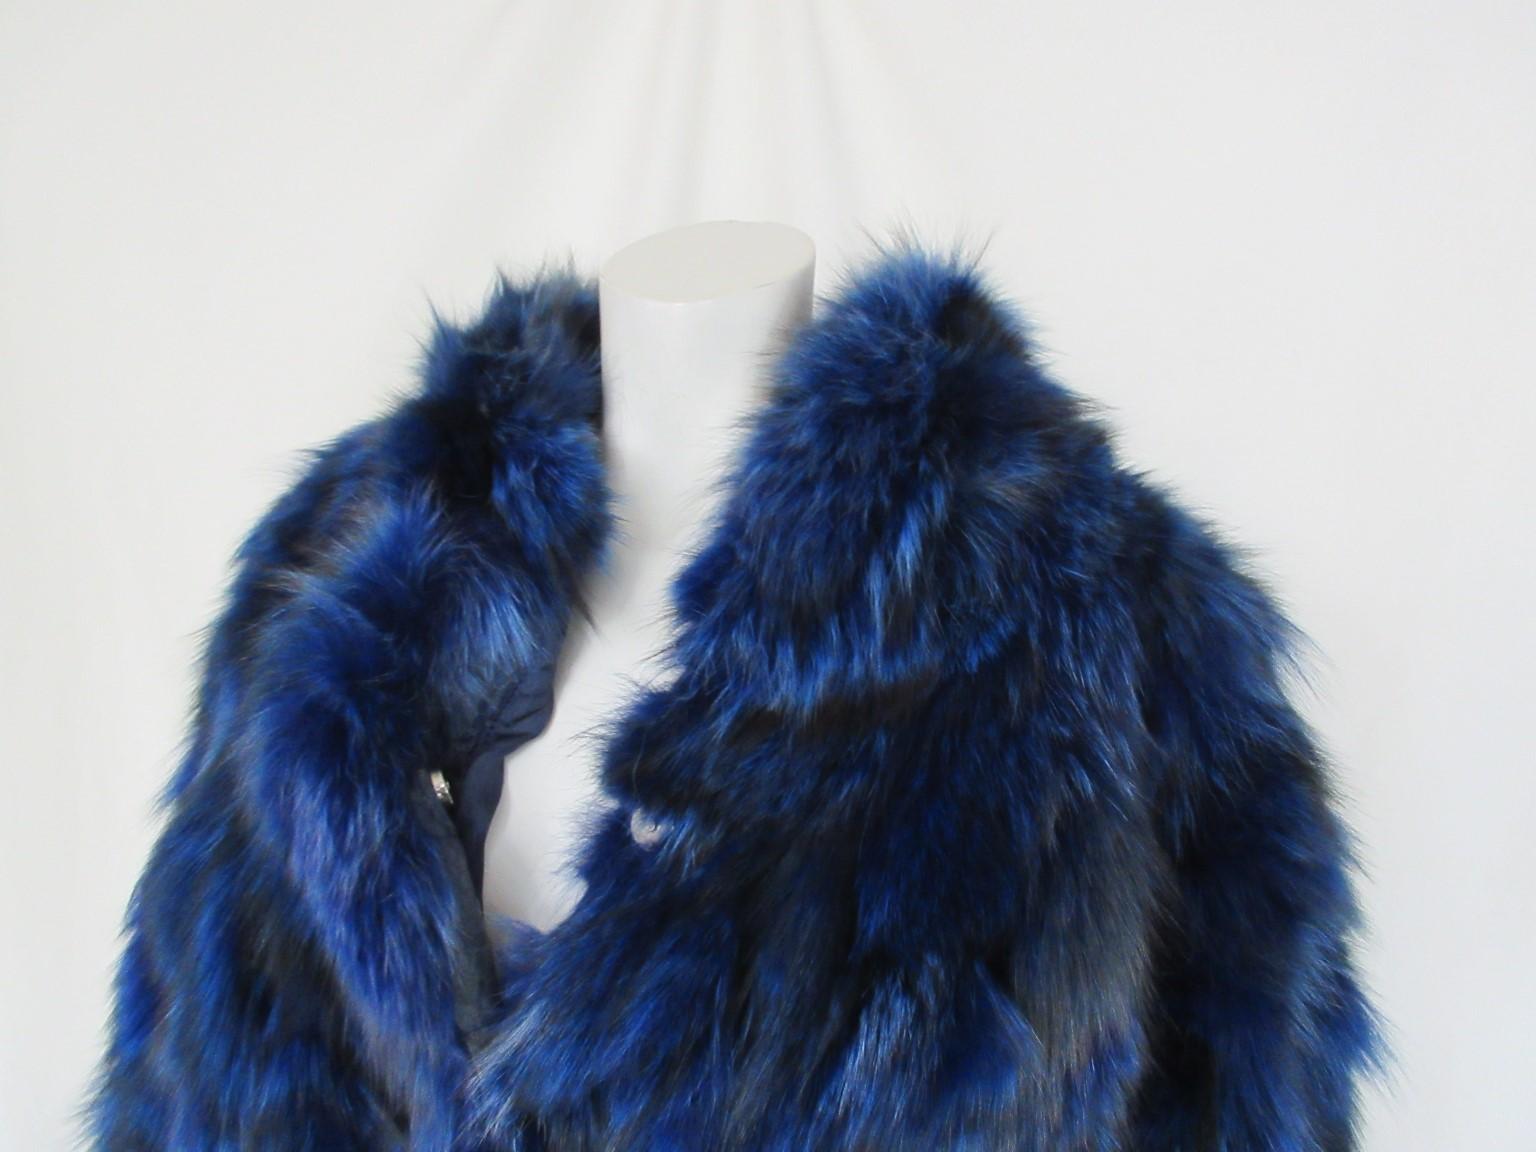 Beautiful vintage blue dyed fox fur jacket, 

We offer more exclusive fur items, view our frontstore

Details:
blue dyed fox fur
2 pockets and 3 press buttons.
Wide sleeves
Can be worn by men or women and smaller person
Vintage condition
Belt is not